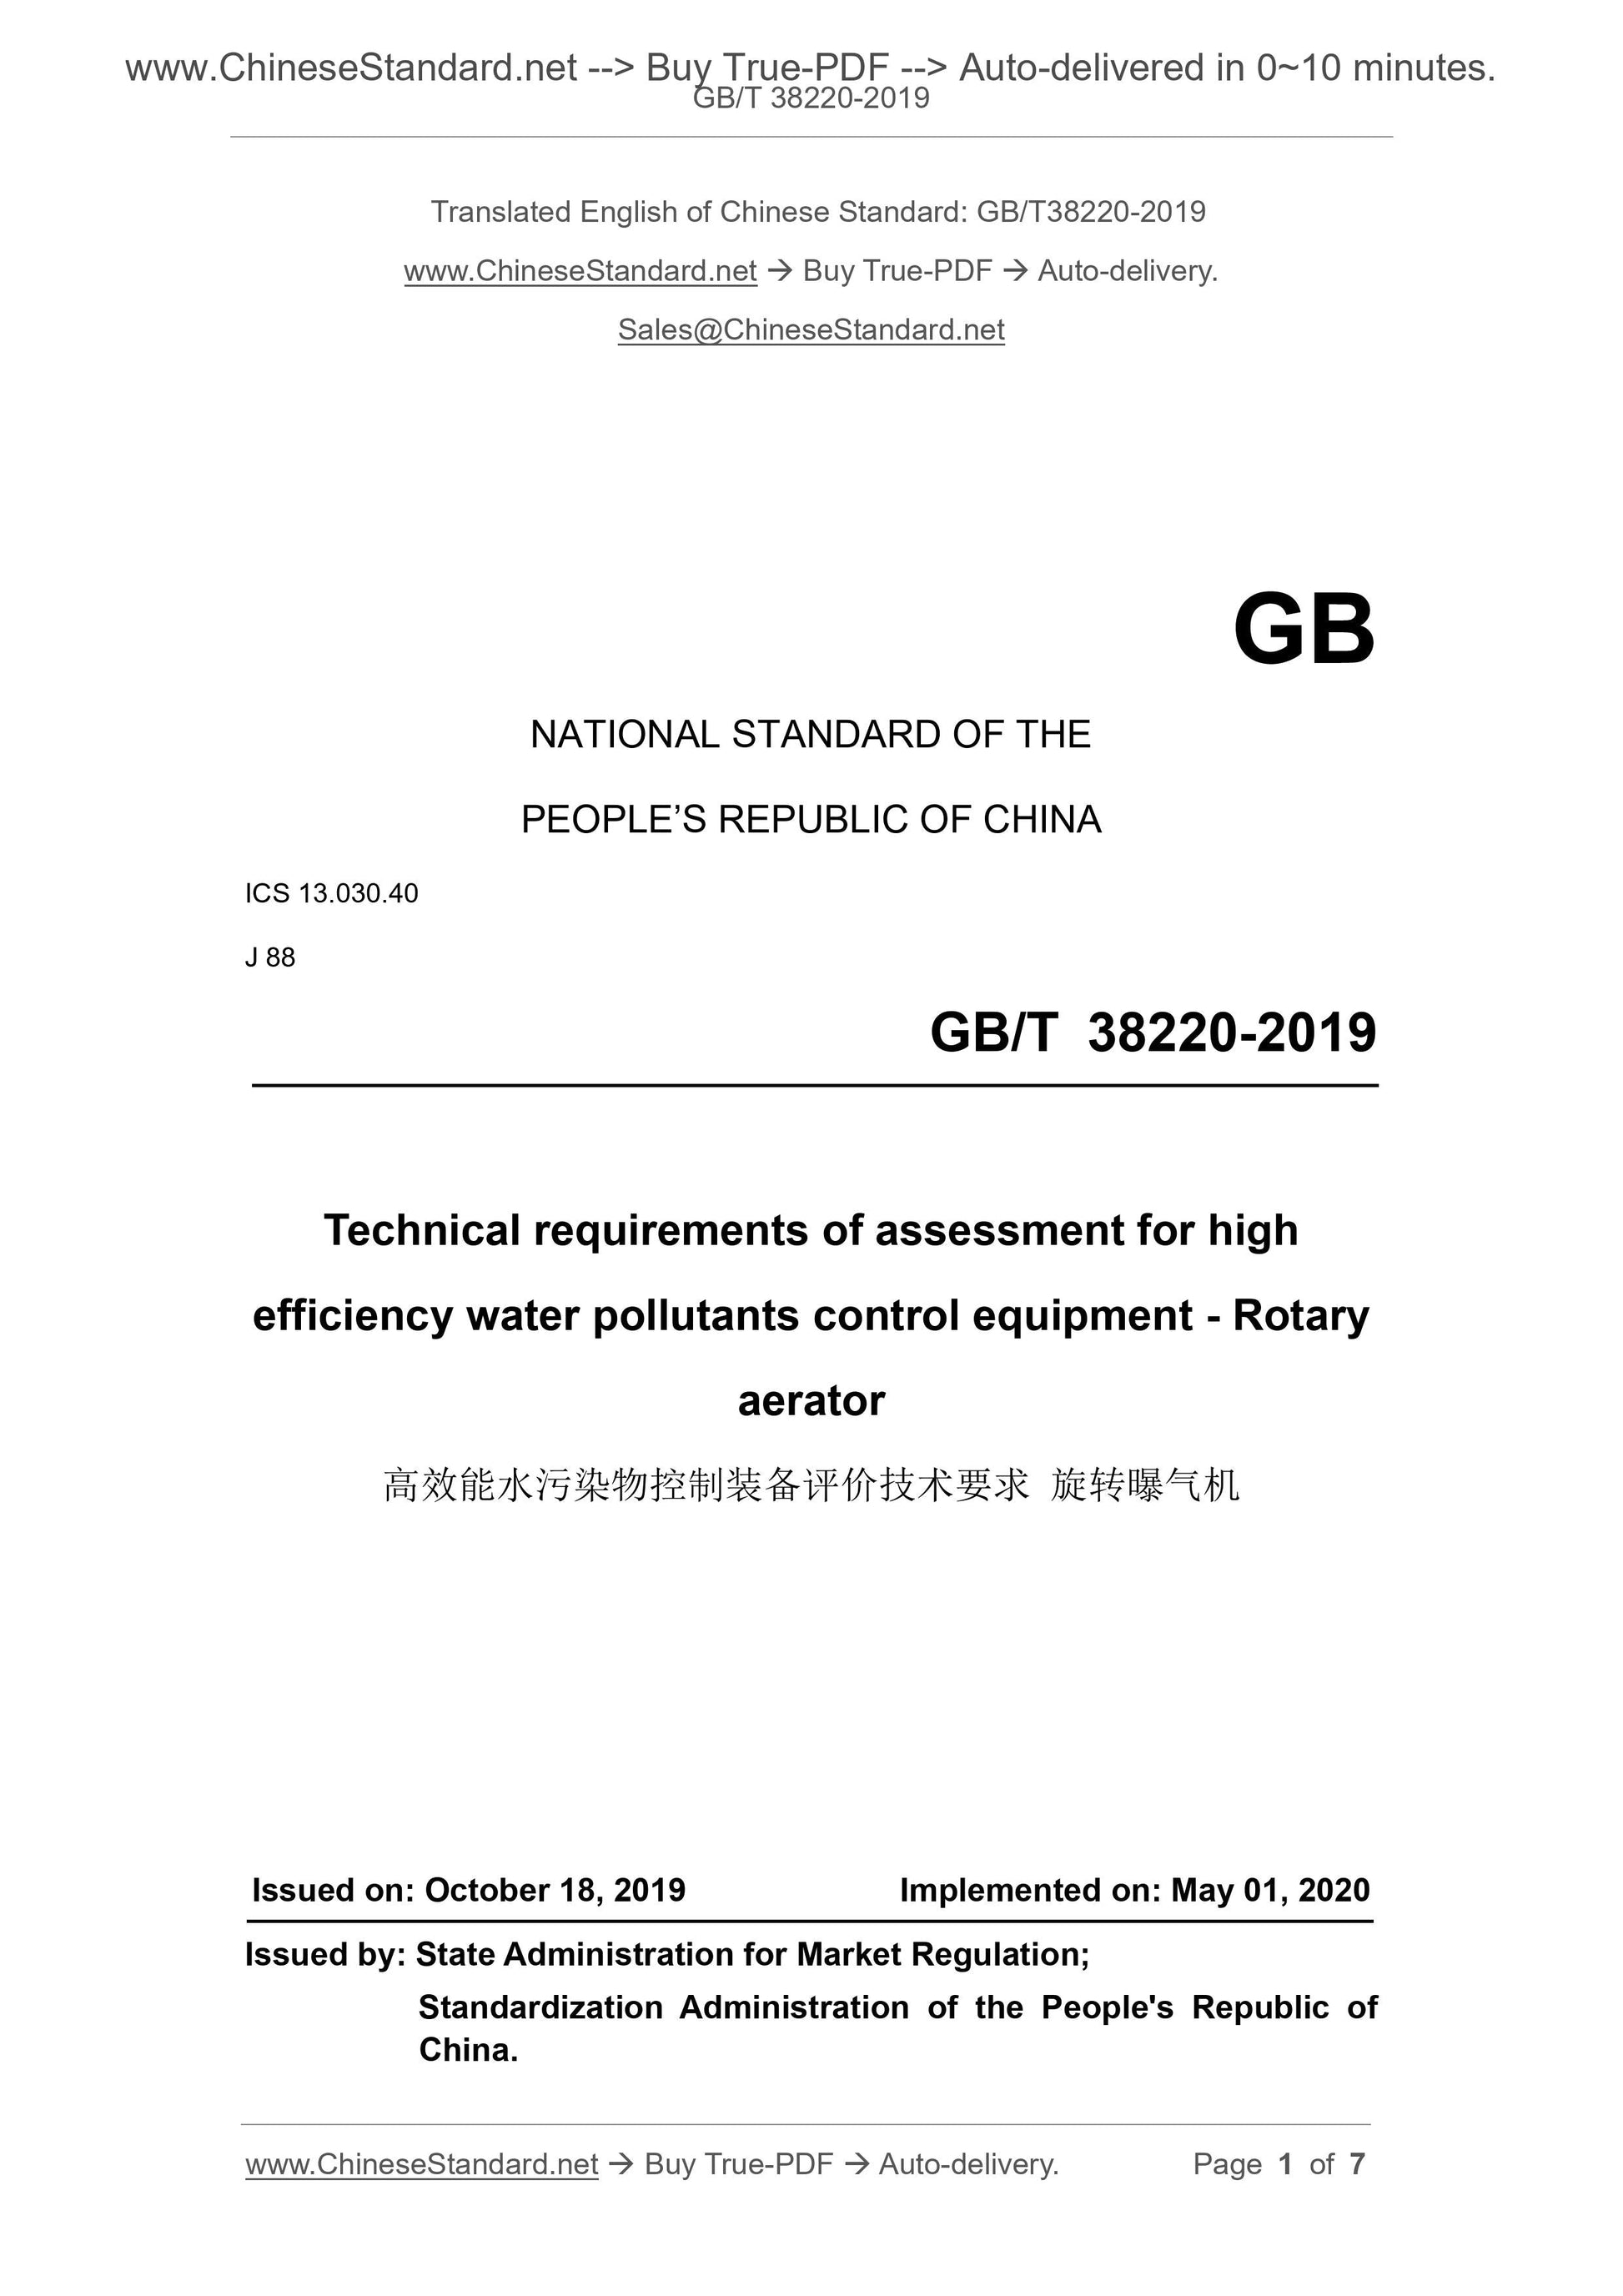 GB/T 38220-2019 Page 1